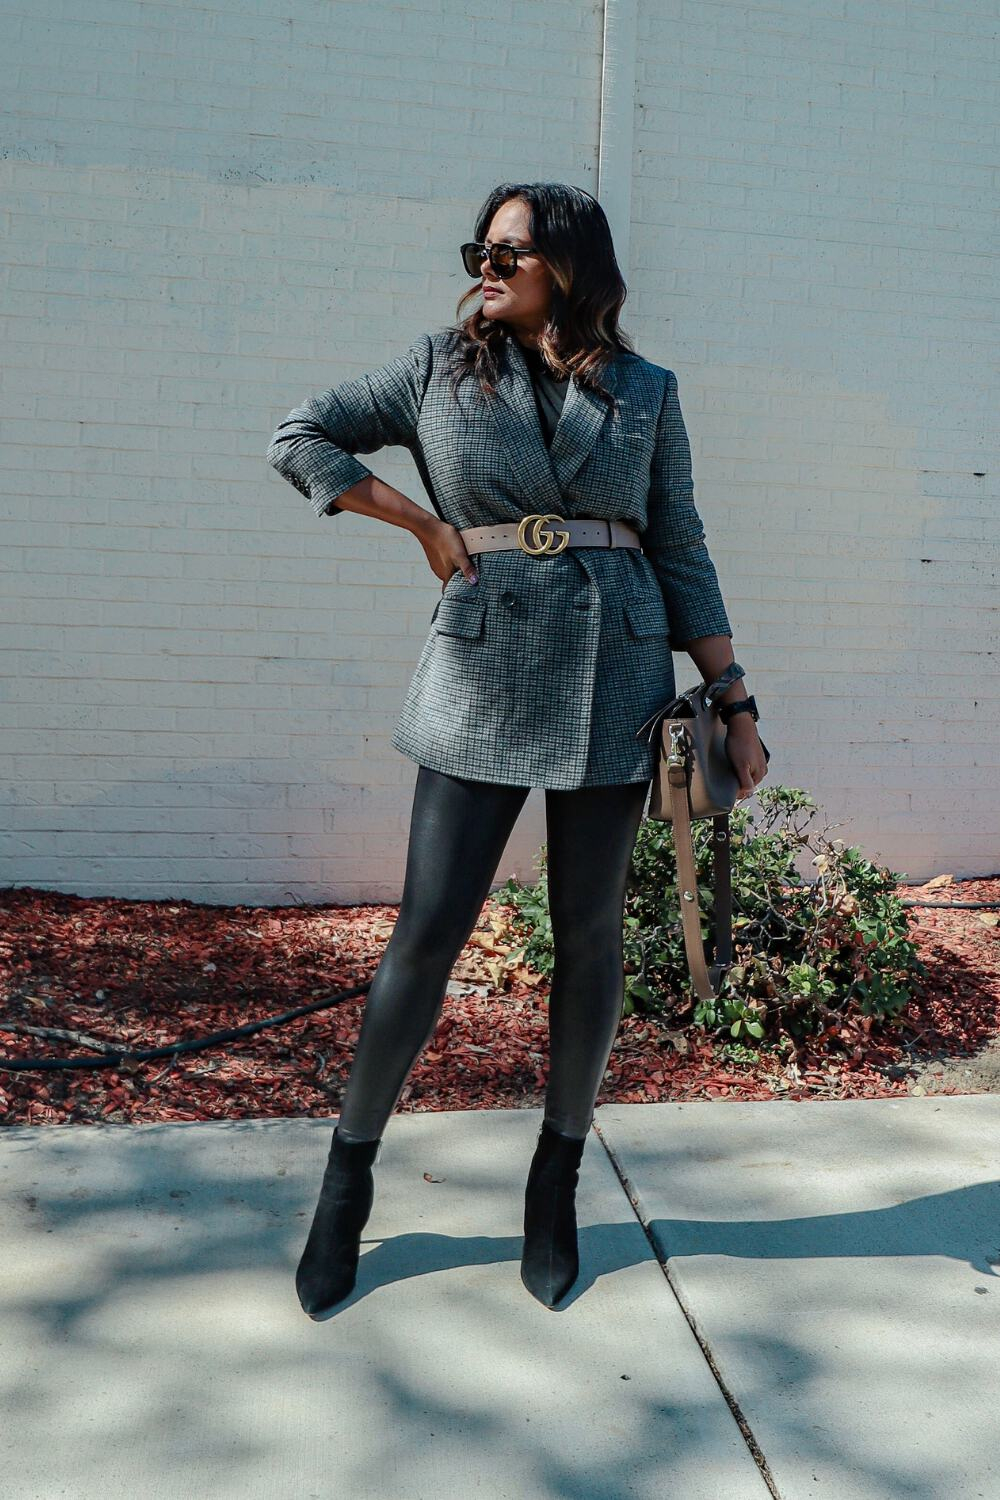 Faux Leather Leggings with Plaid Blazer Outfit